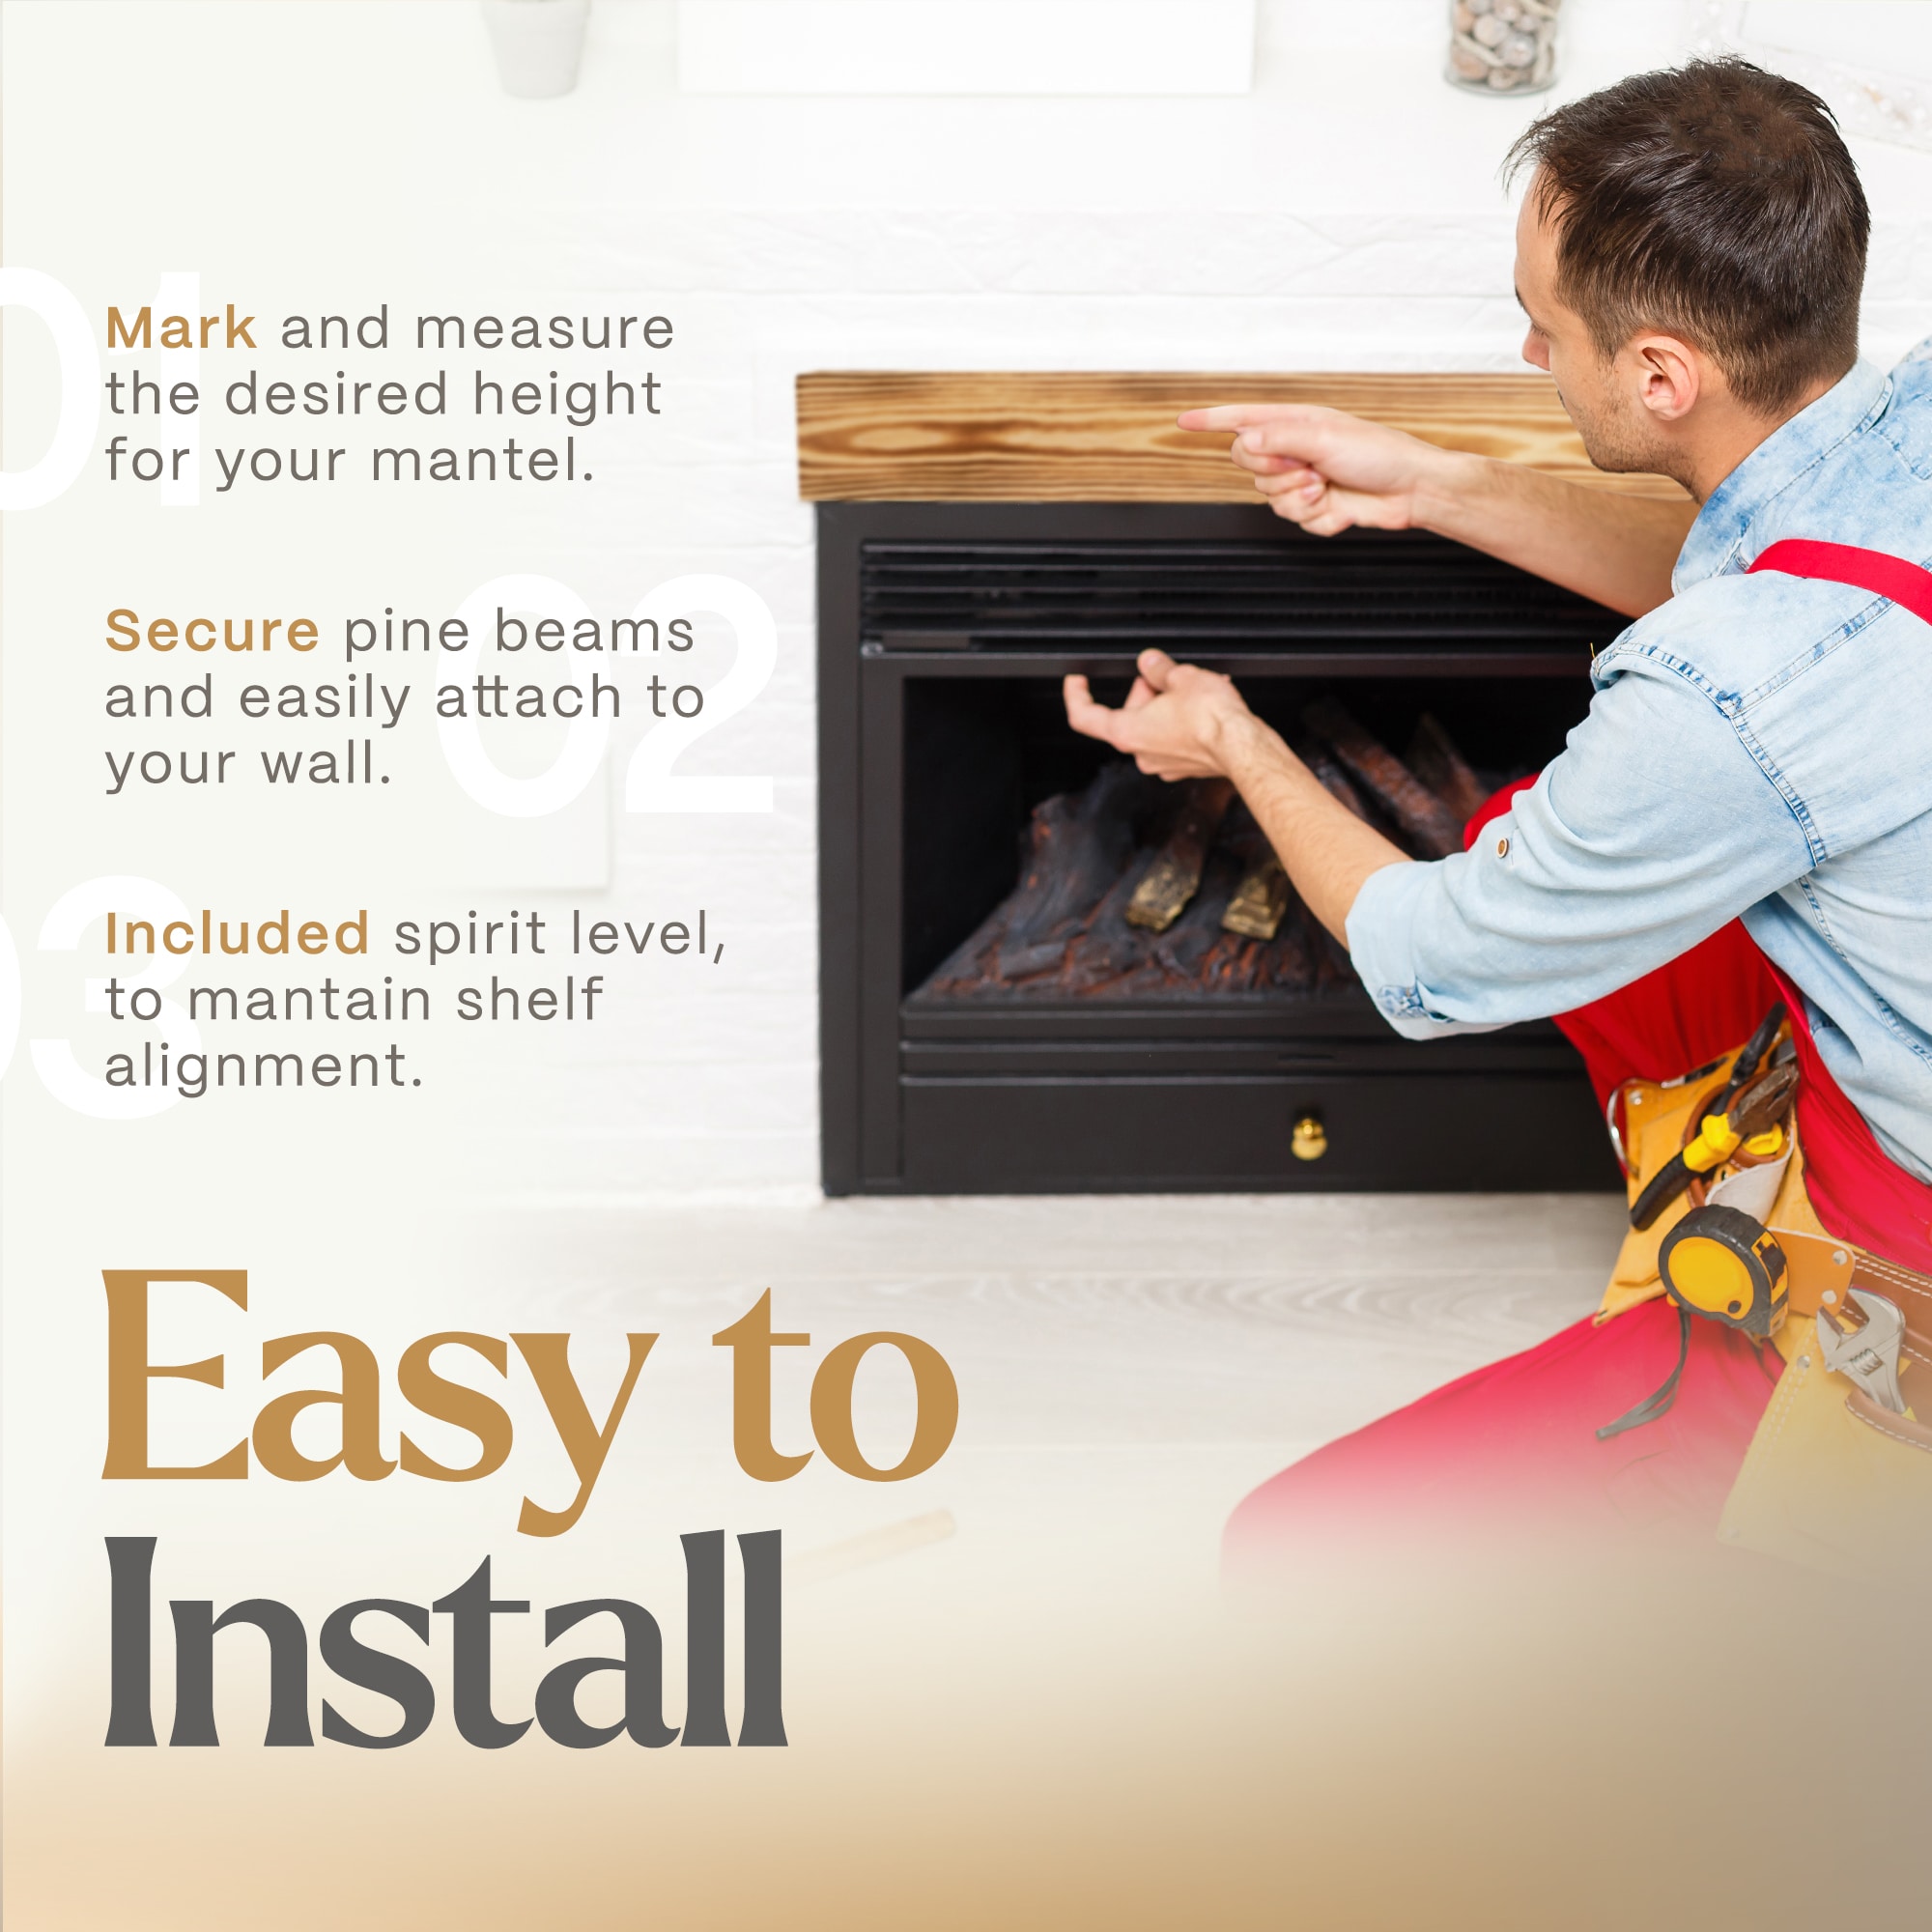 DS Cool Wall or Stove Hearth and Wall Protection, 21st Century